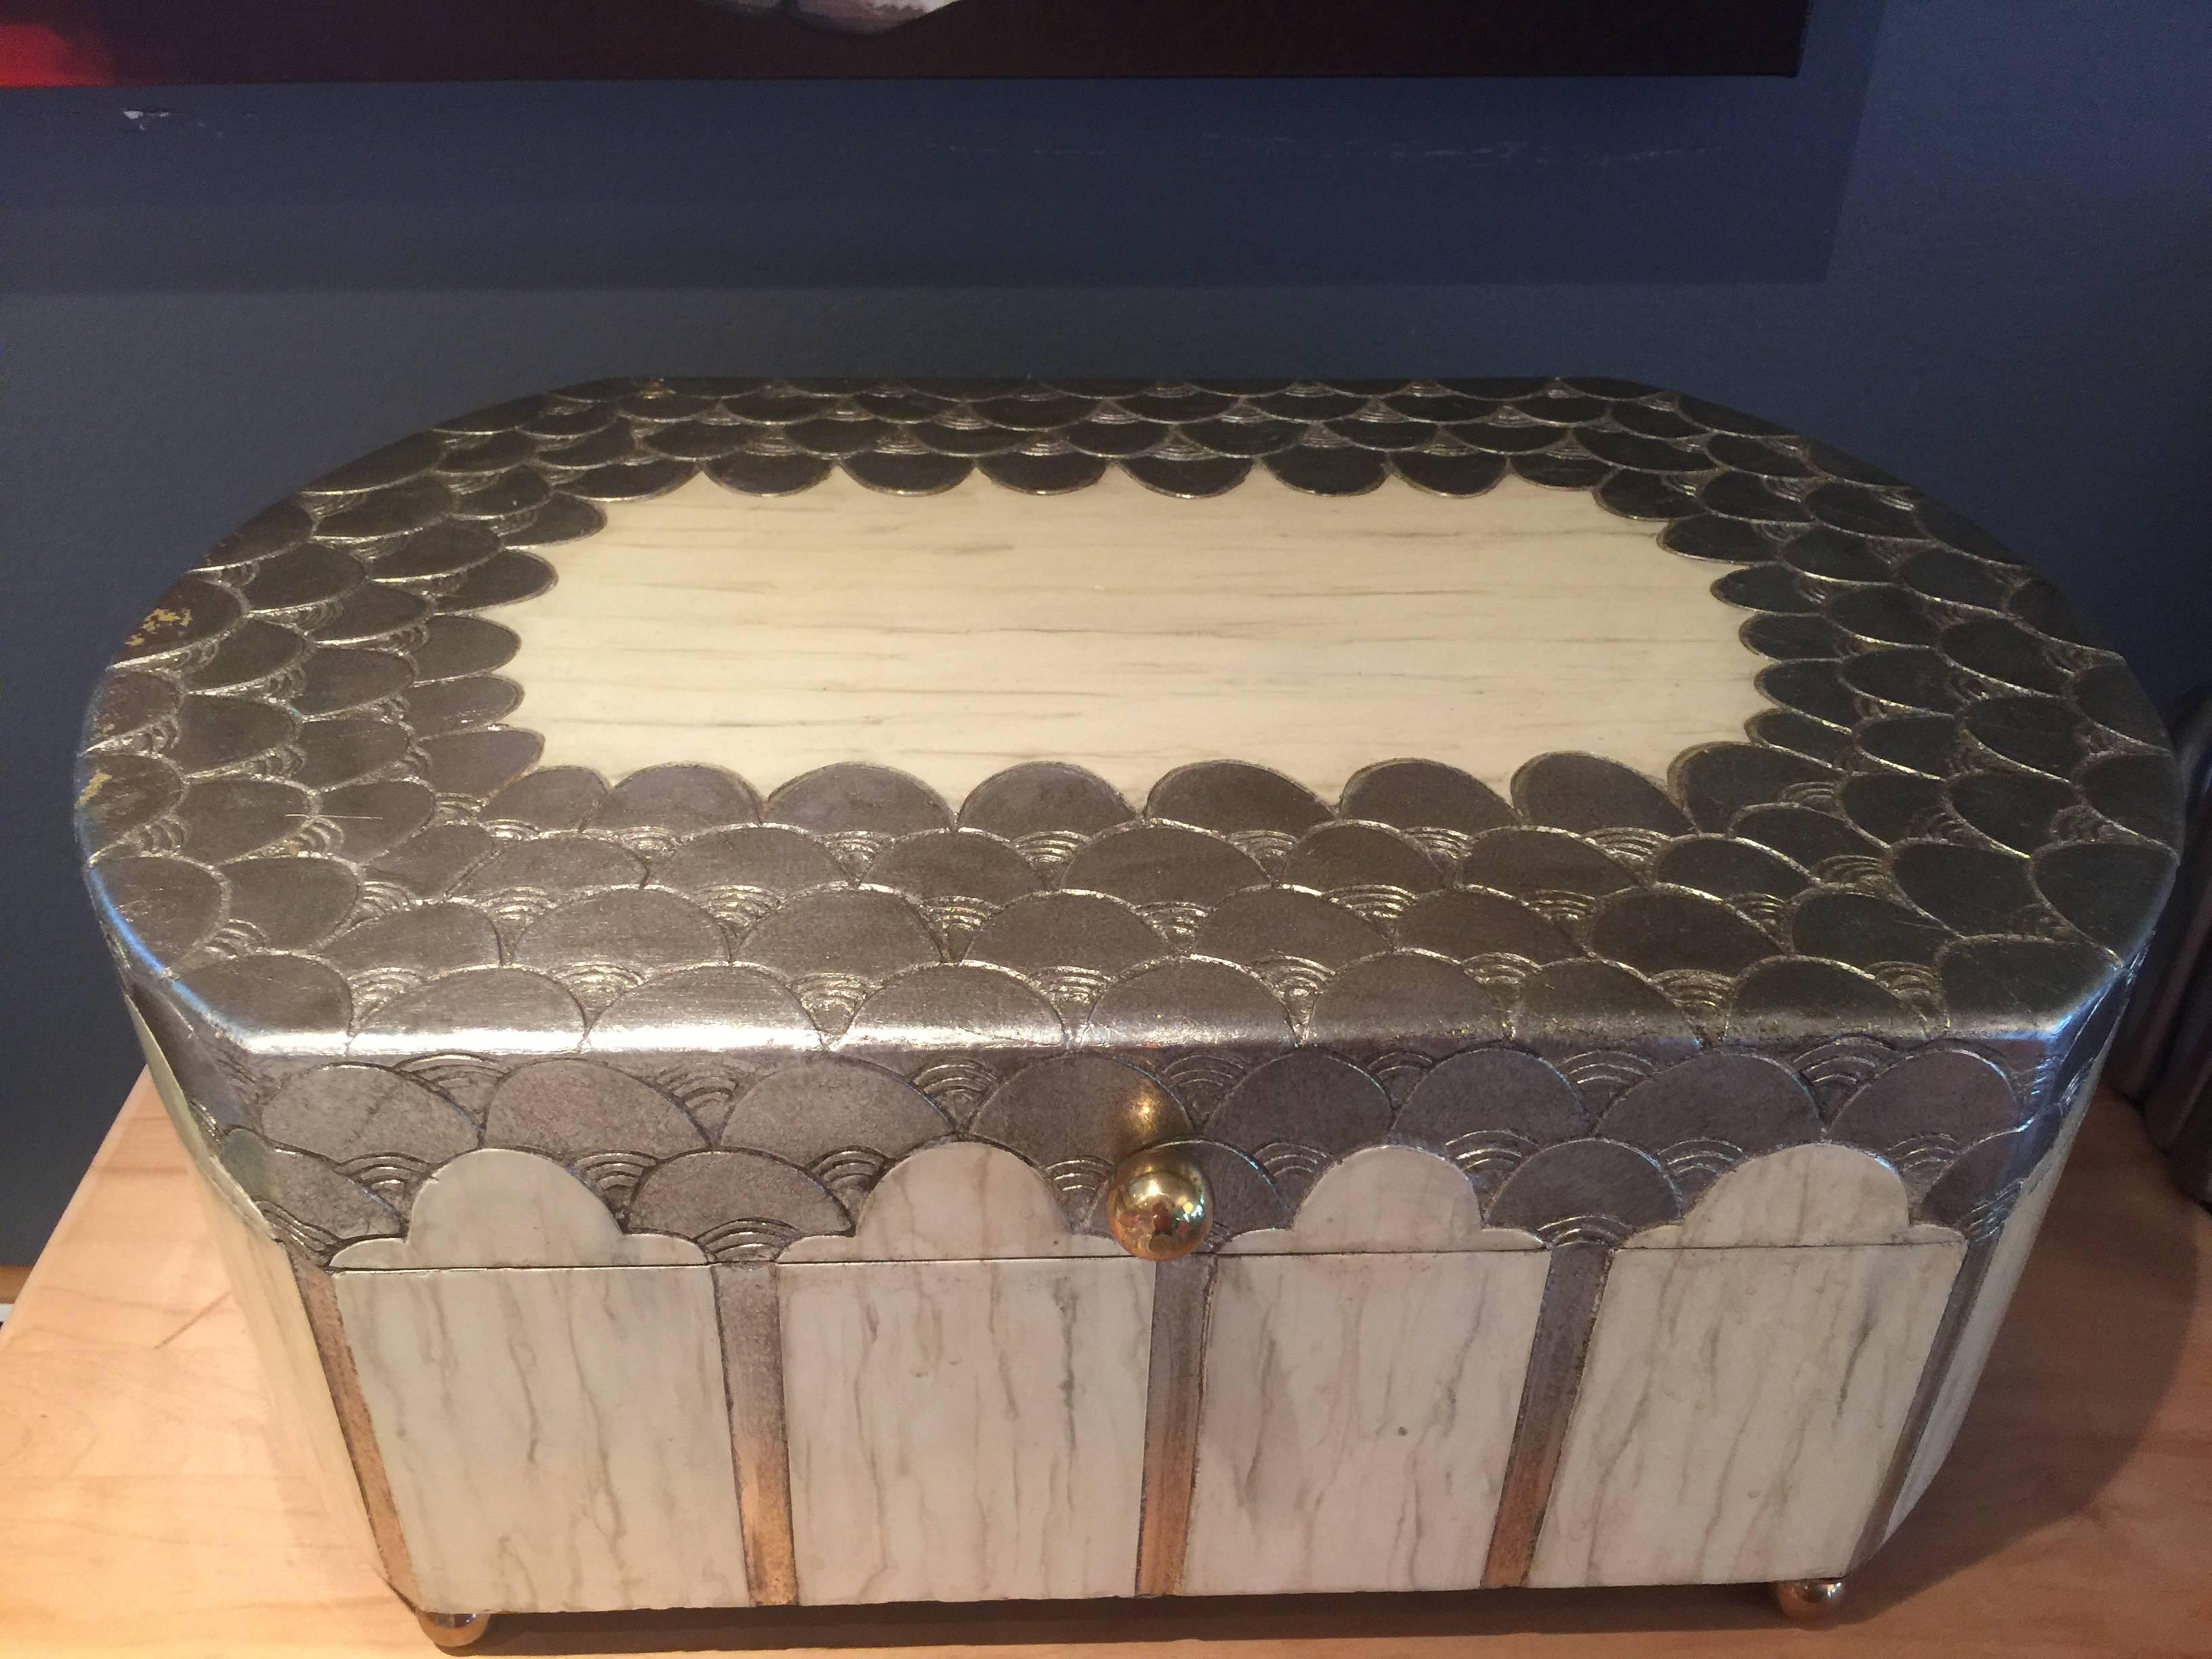 A beautifully detailed box in the deco style.
Designed with a silver leaf deco pattern which is complimented by what appears to be sliced bone.
the box rests on brass ball feet.
Great color combination and use of material.
Scaled beautifully.